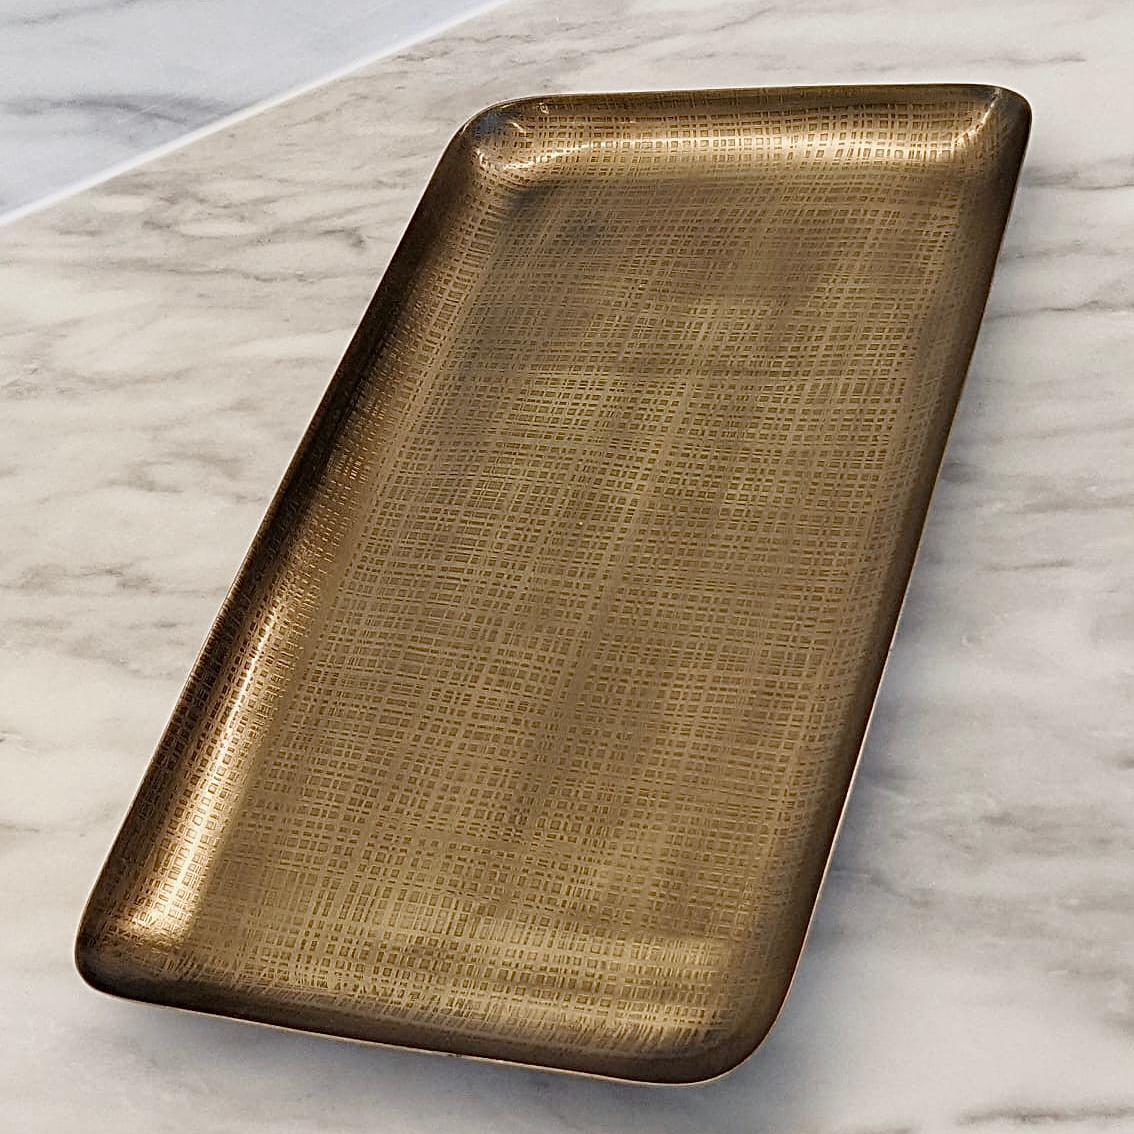 Etched Tray- Brass - Thrive Interiors and Design